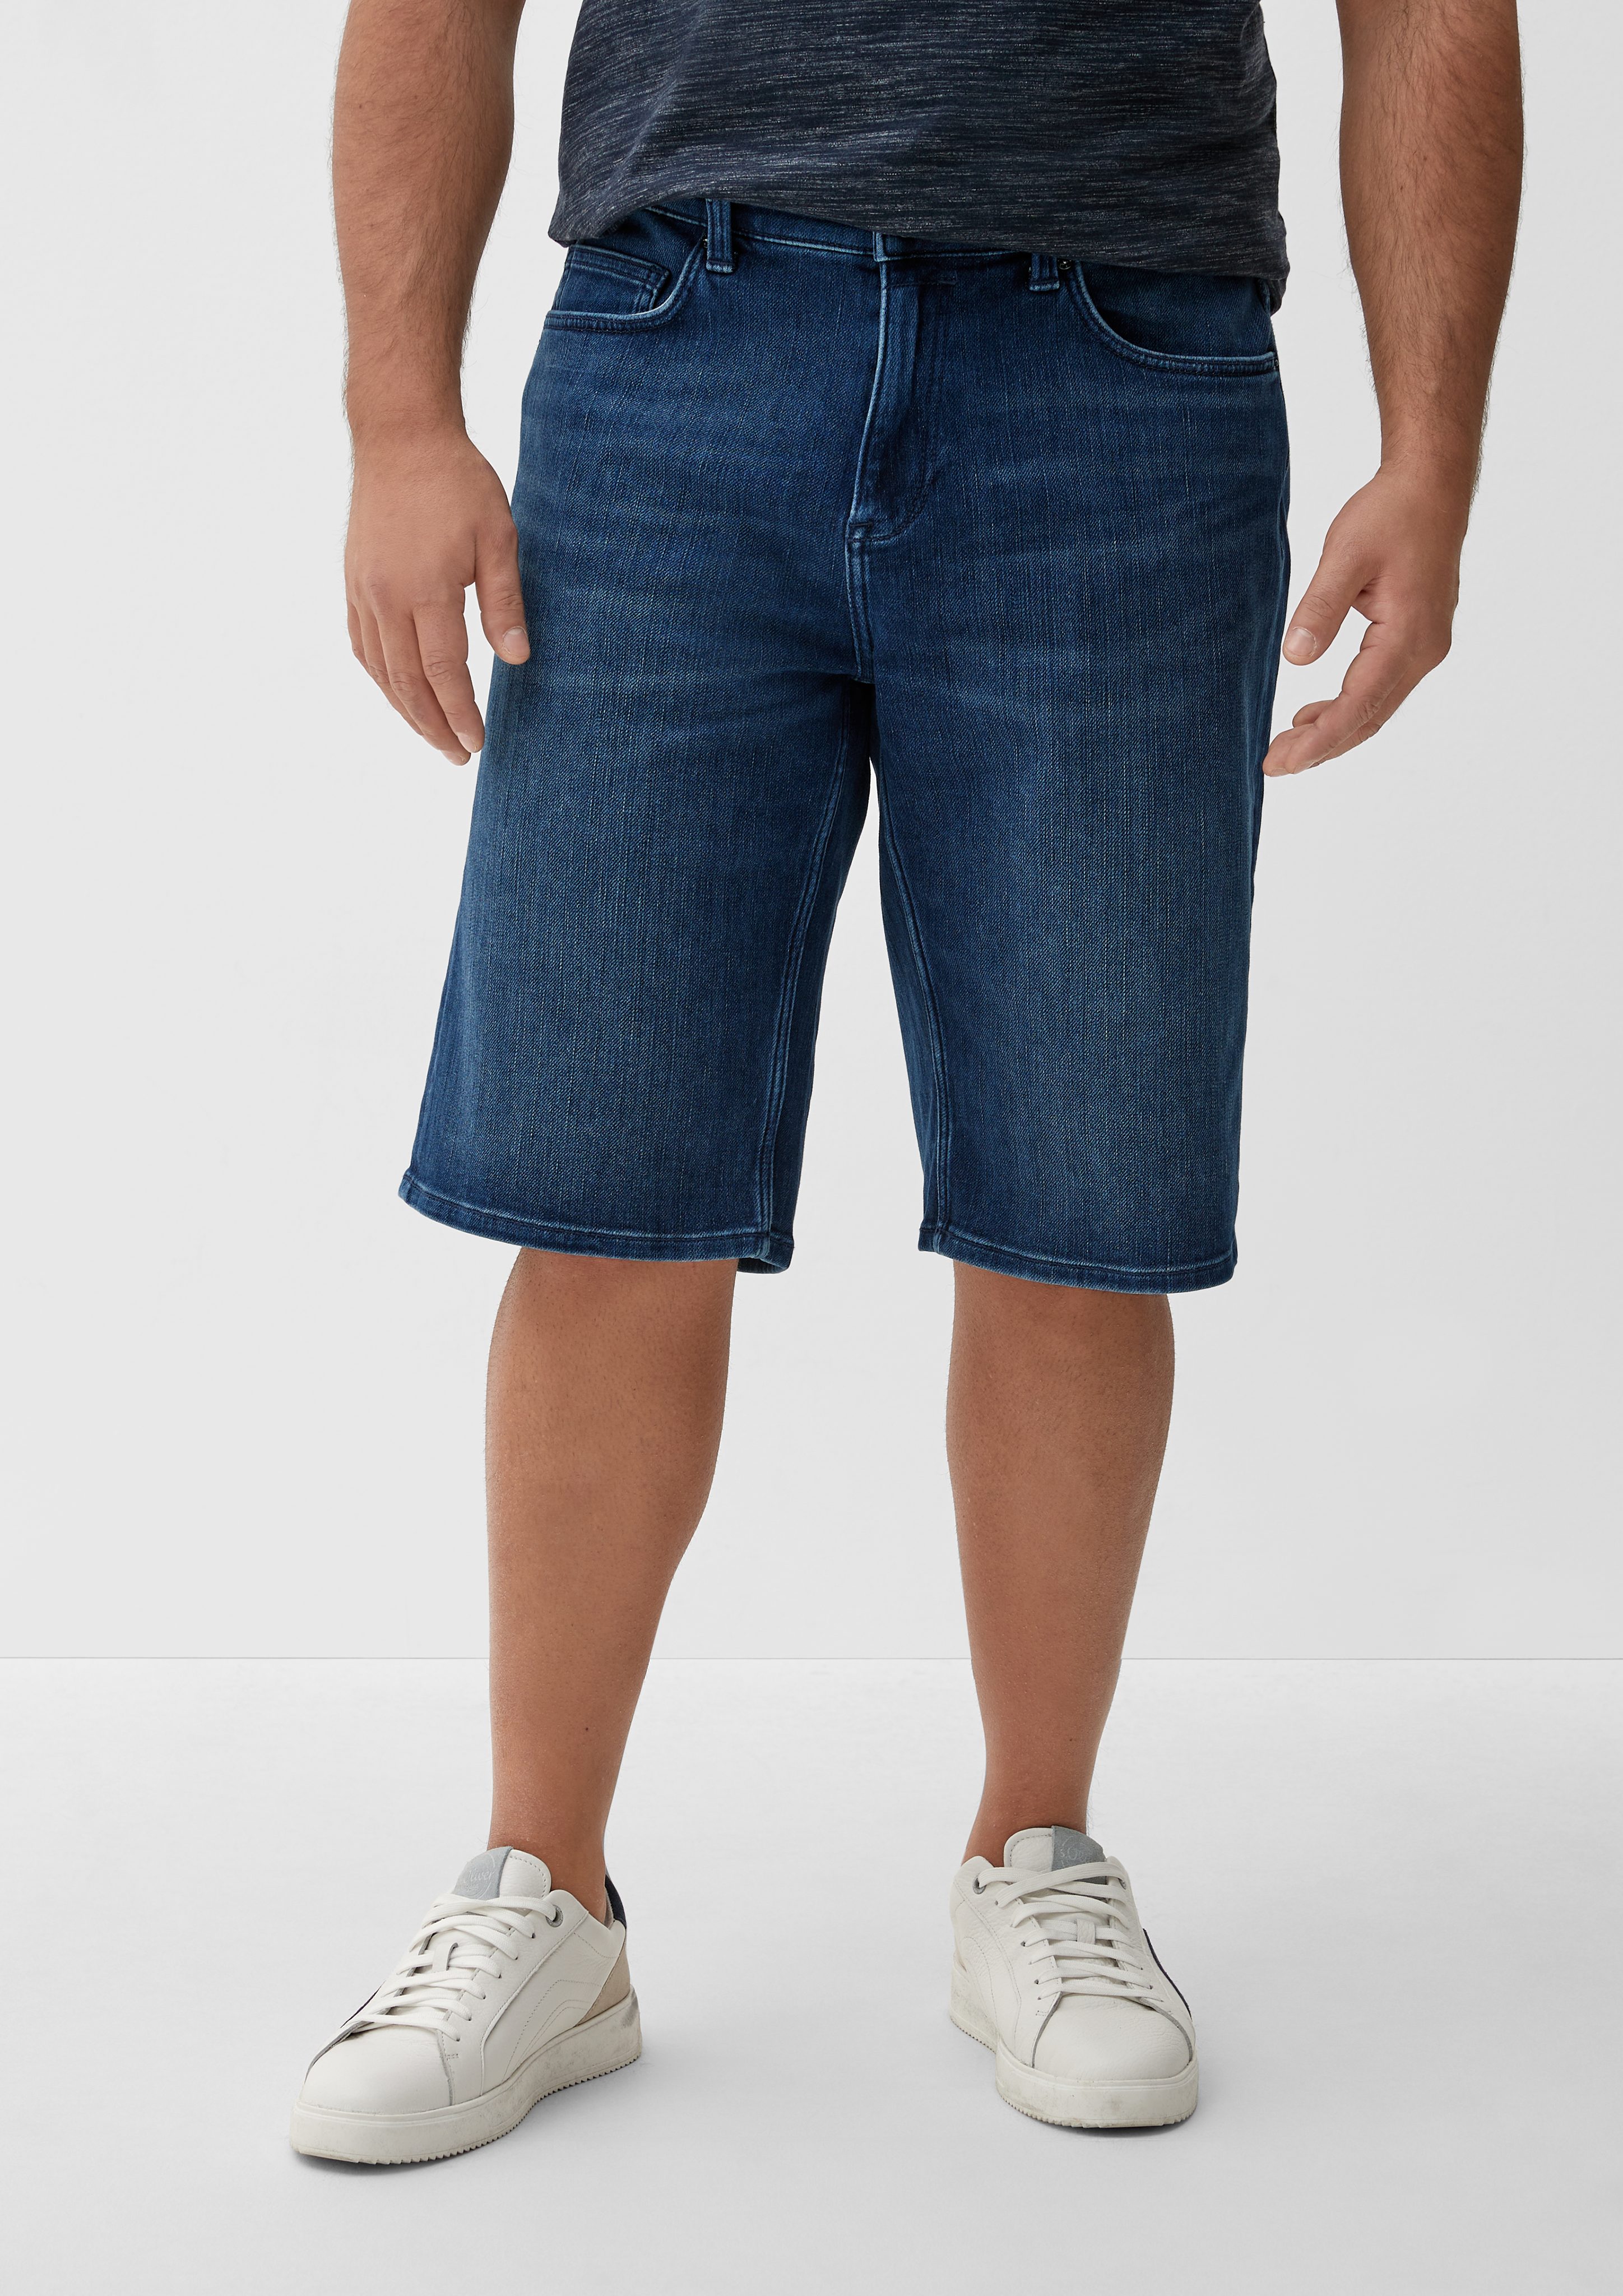 / Relaxed Casby Rise tiefblau Straight Fit / Mid s.Oliver Jeans-Shorts / Jeansshorts Leg